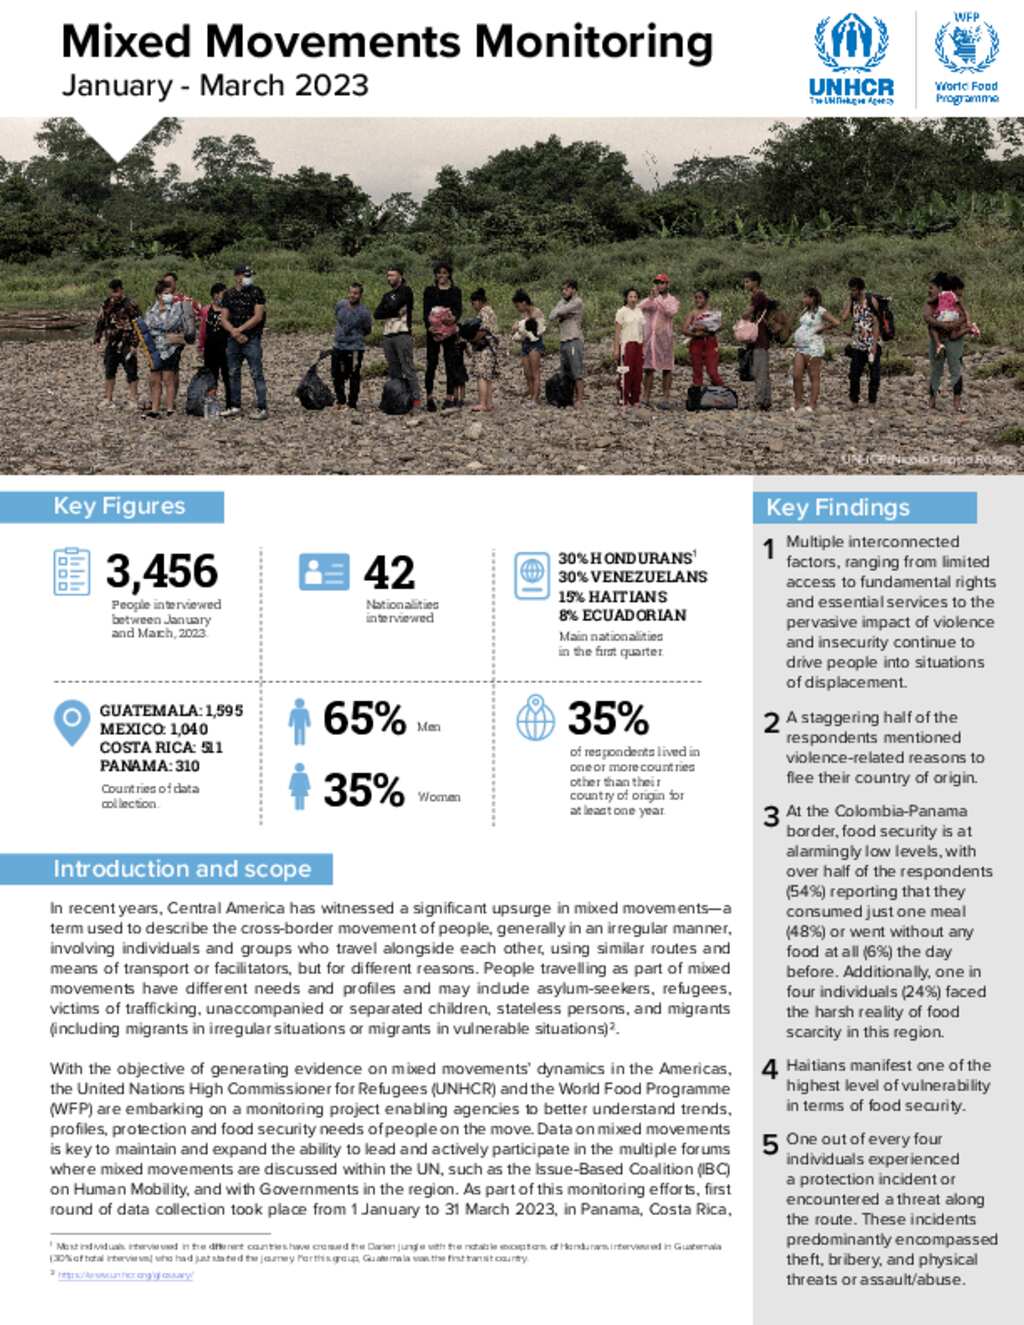 Document - Mixed Movements Monitoring Report | UNHCR-WFP | Q1 2023